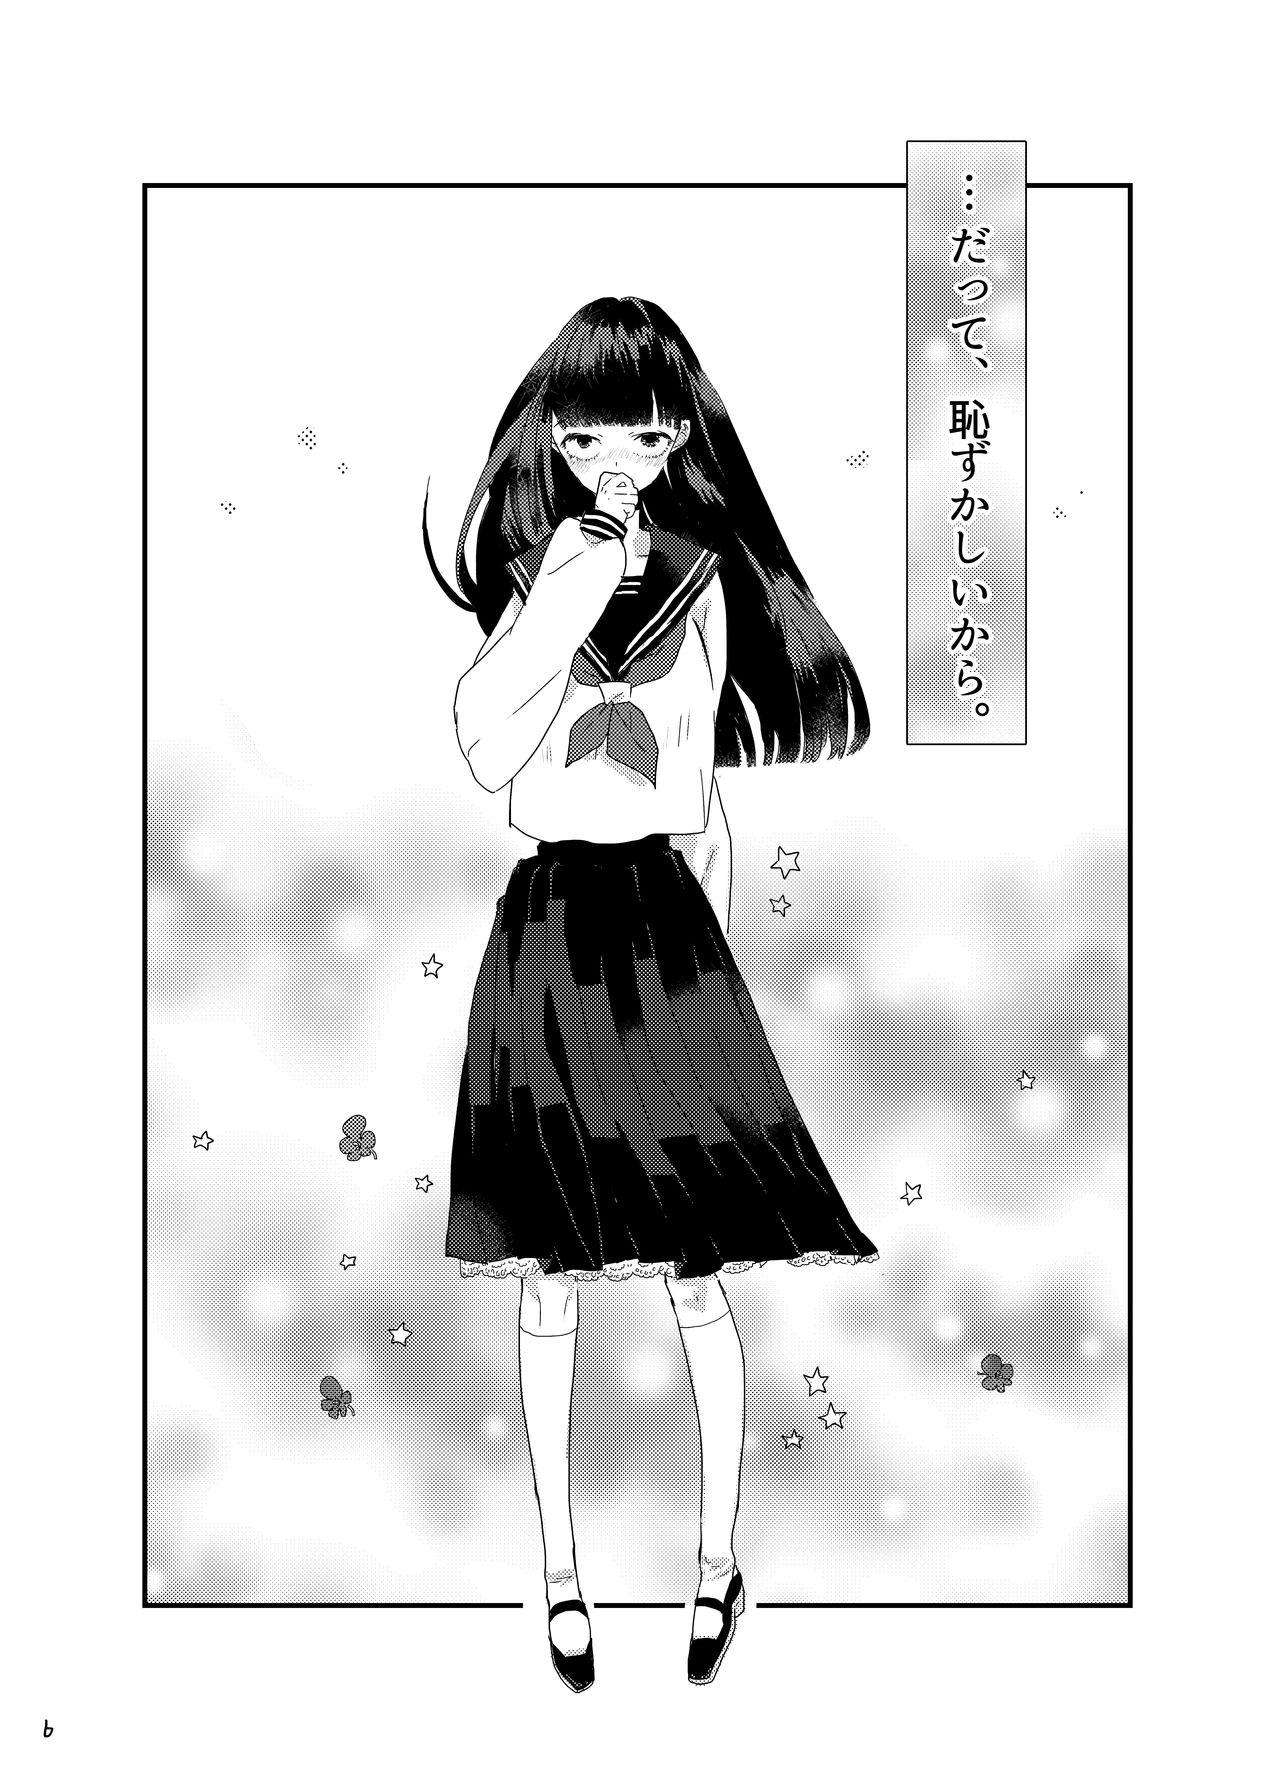 For 砂糖菓子姫 - Mob psycho 100 Lady - Page 5